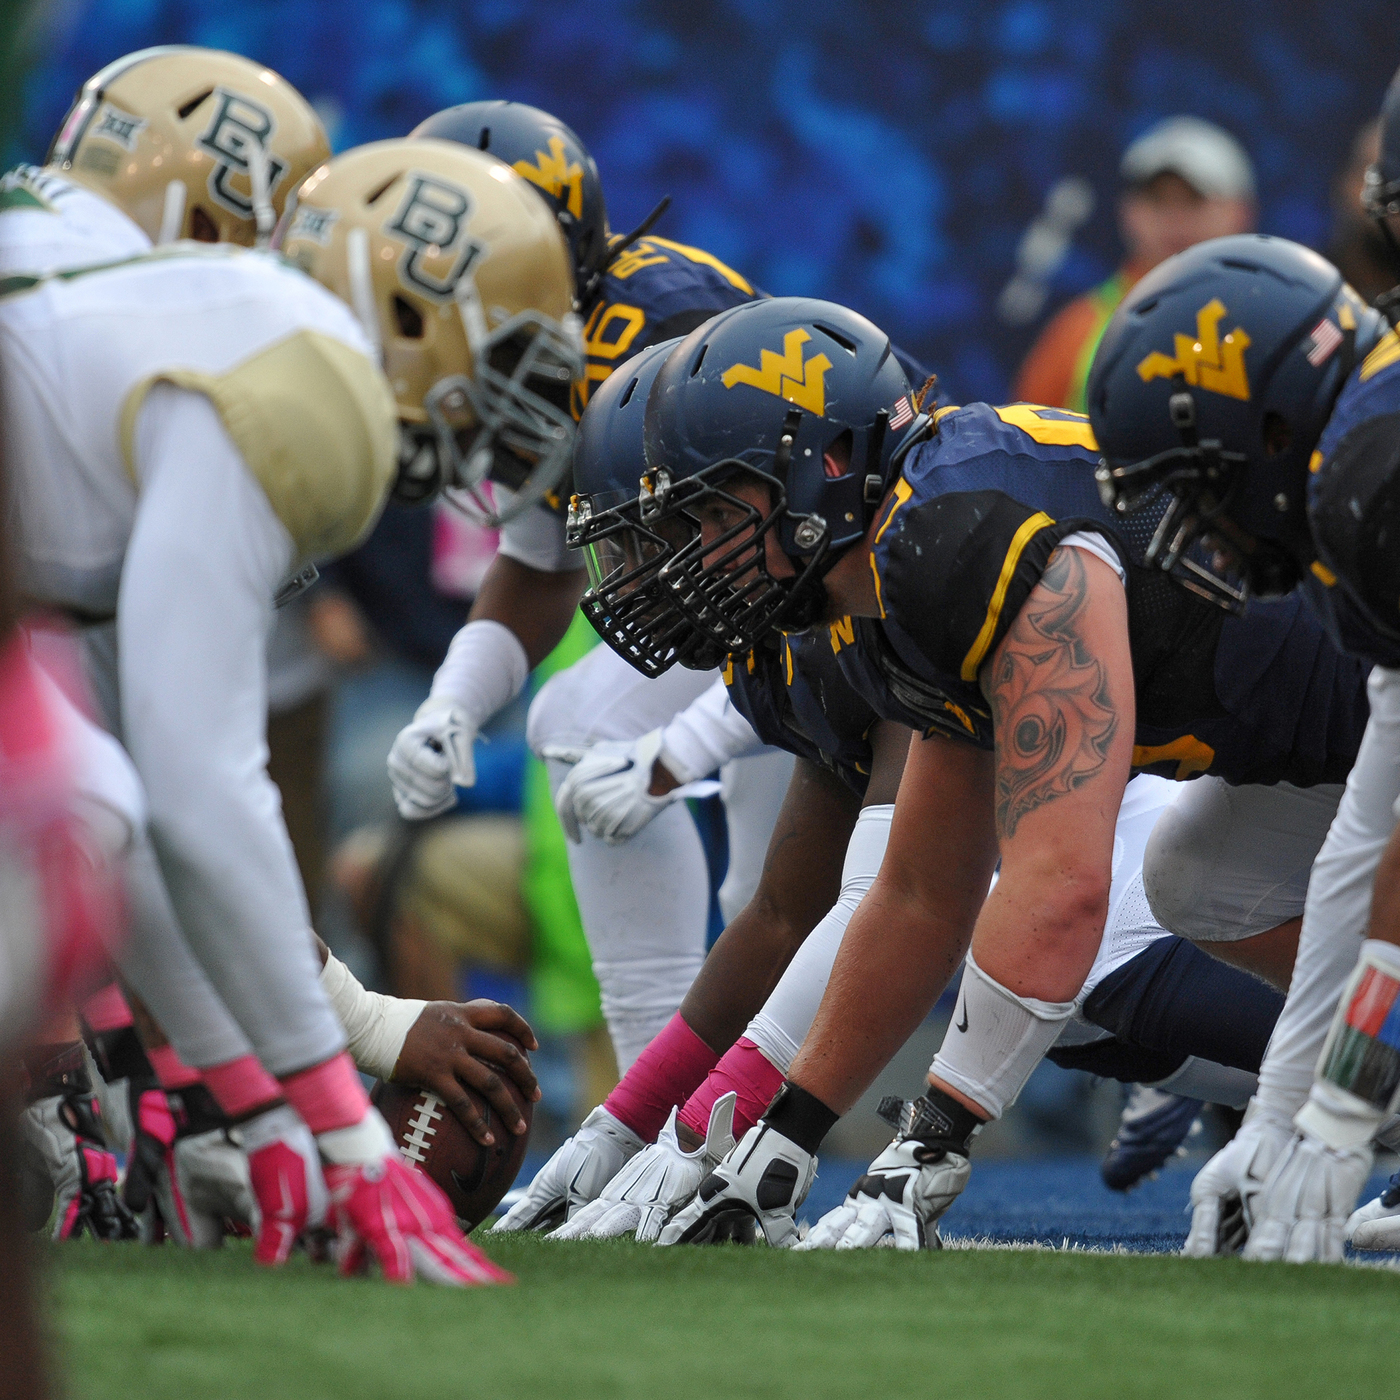 Mountaineer Memories - presented by Staples - 2014 Baylor at WVU Football